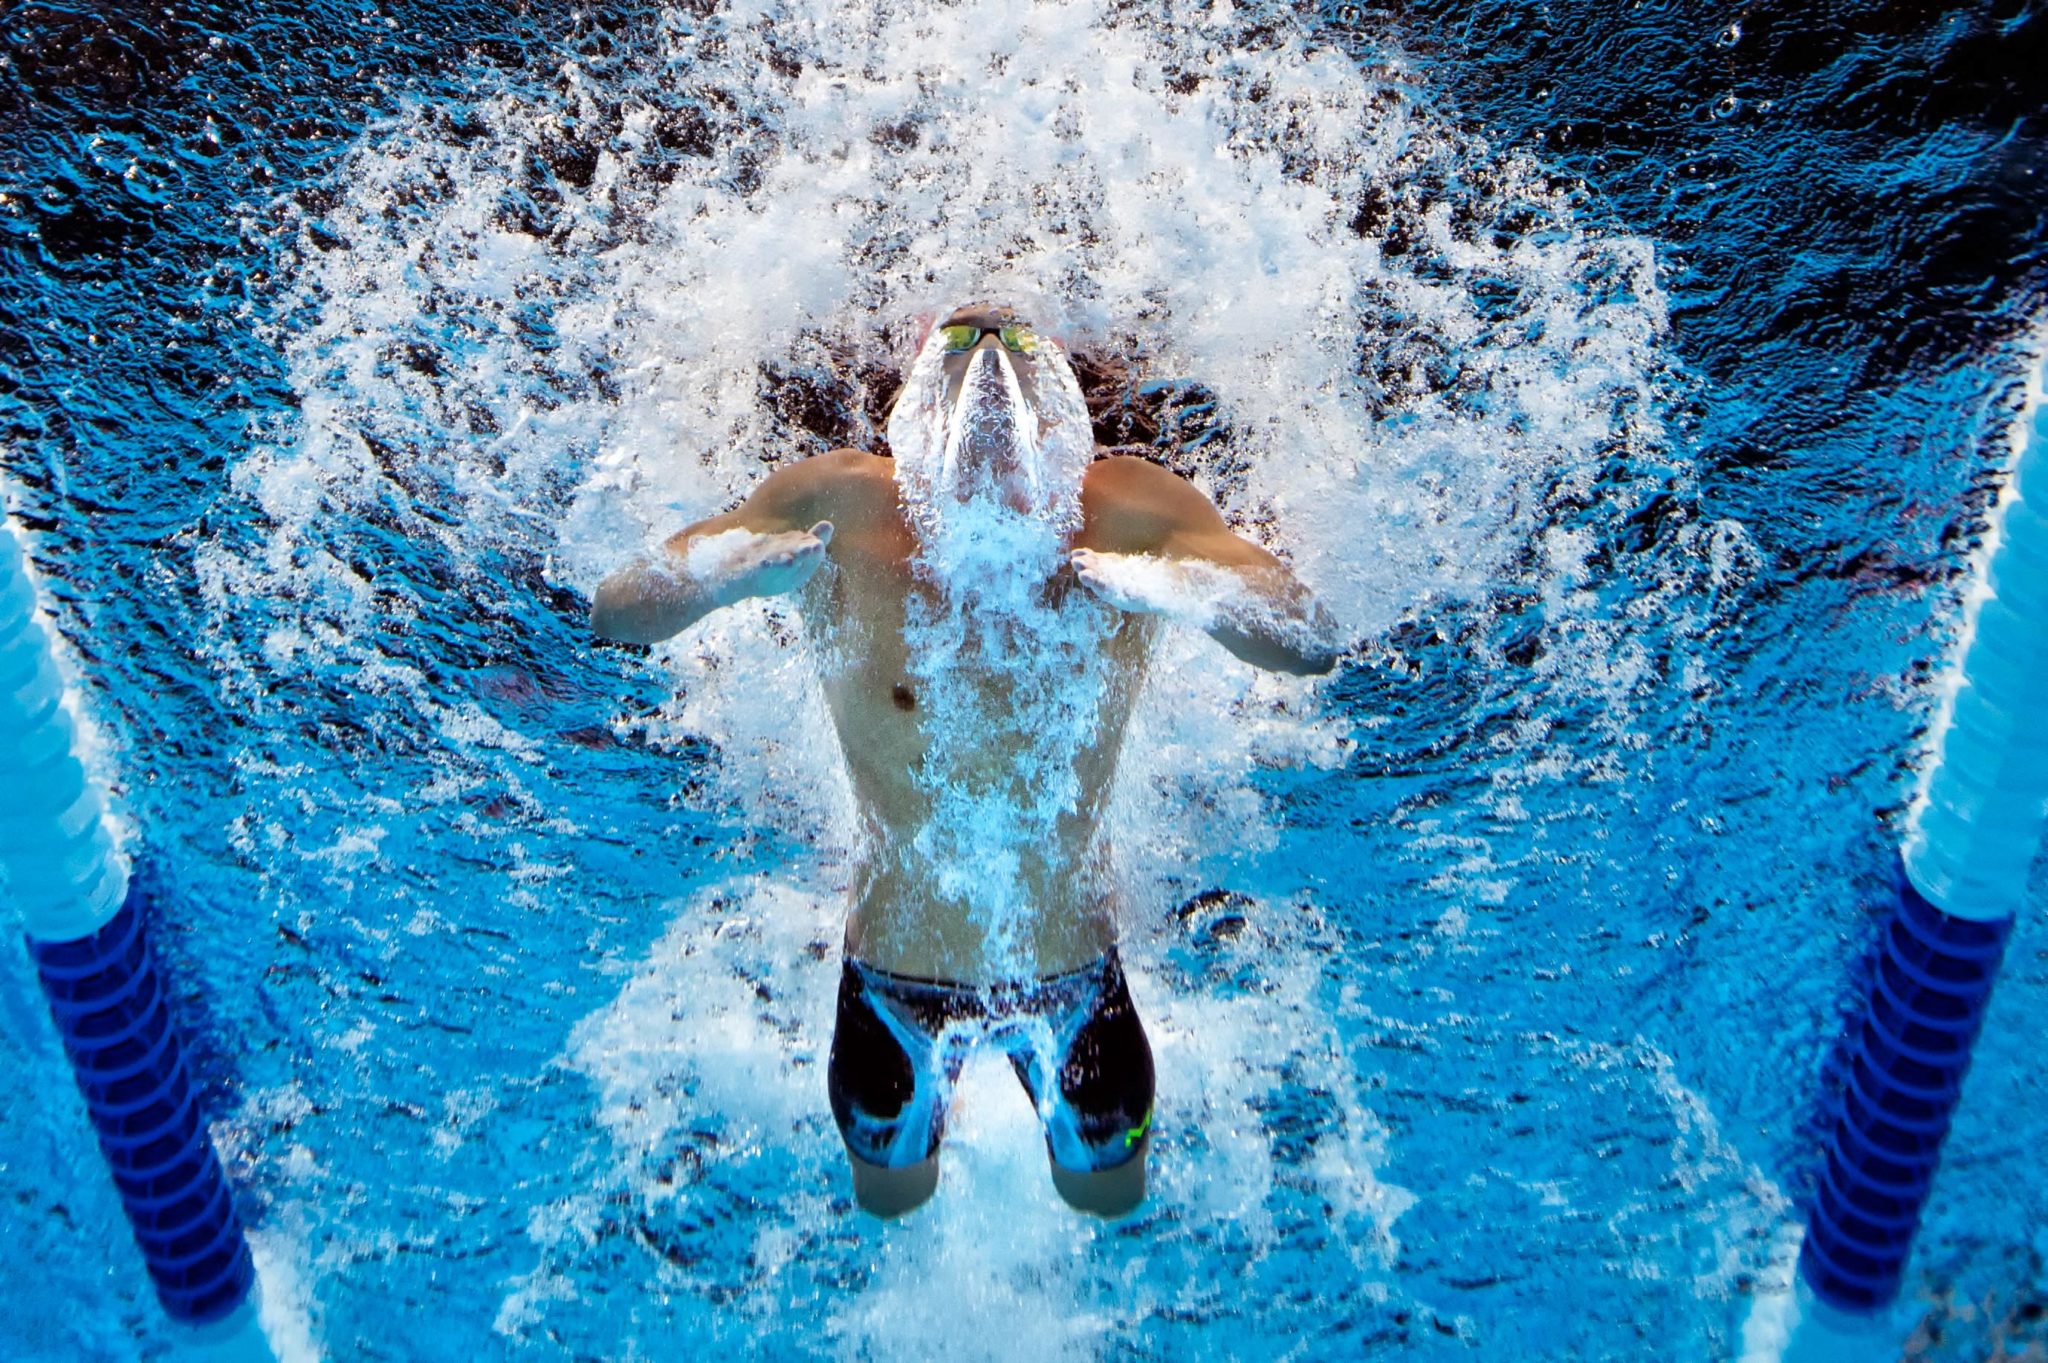 Swimming Is the Best Full-Body Workout for Your Health